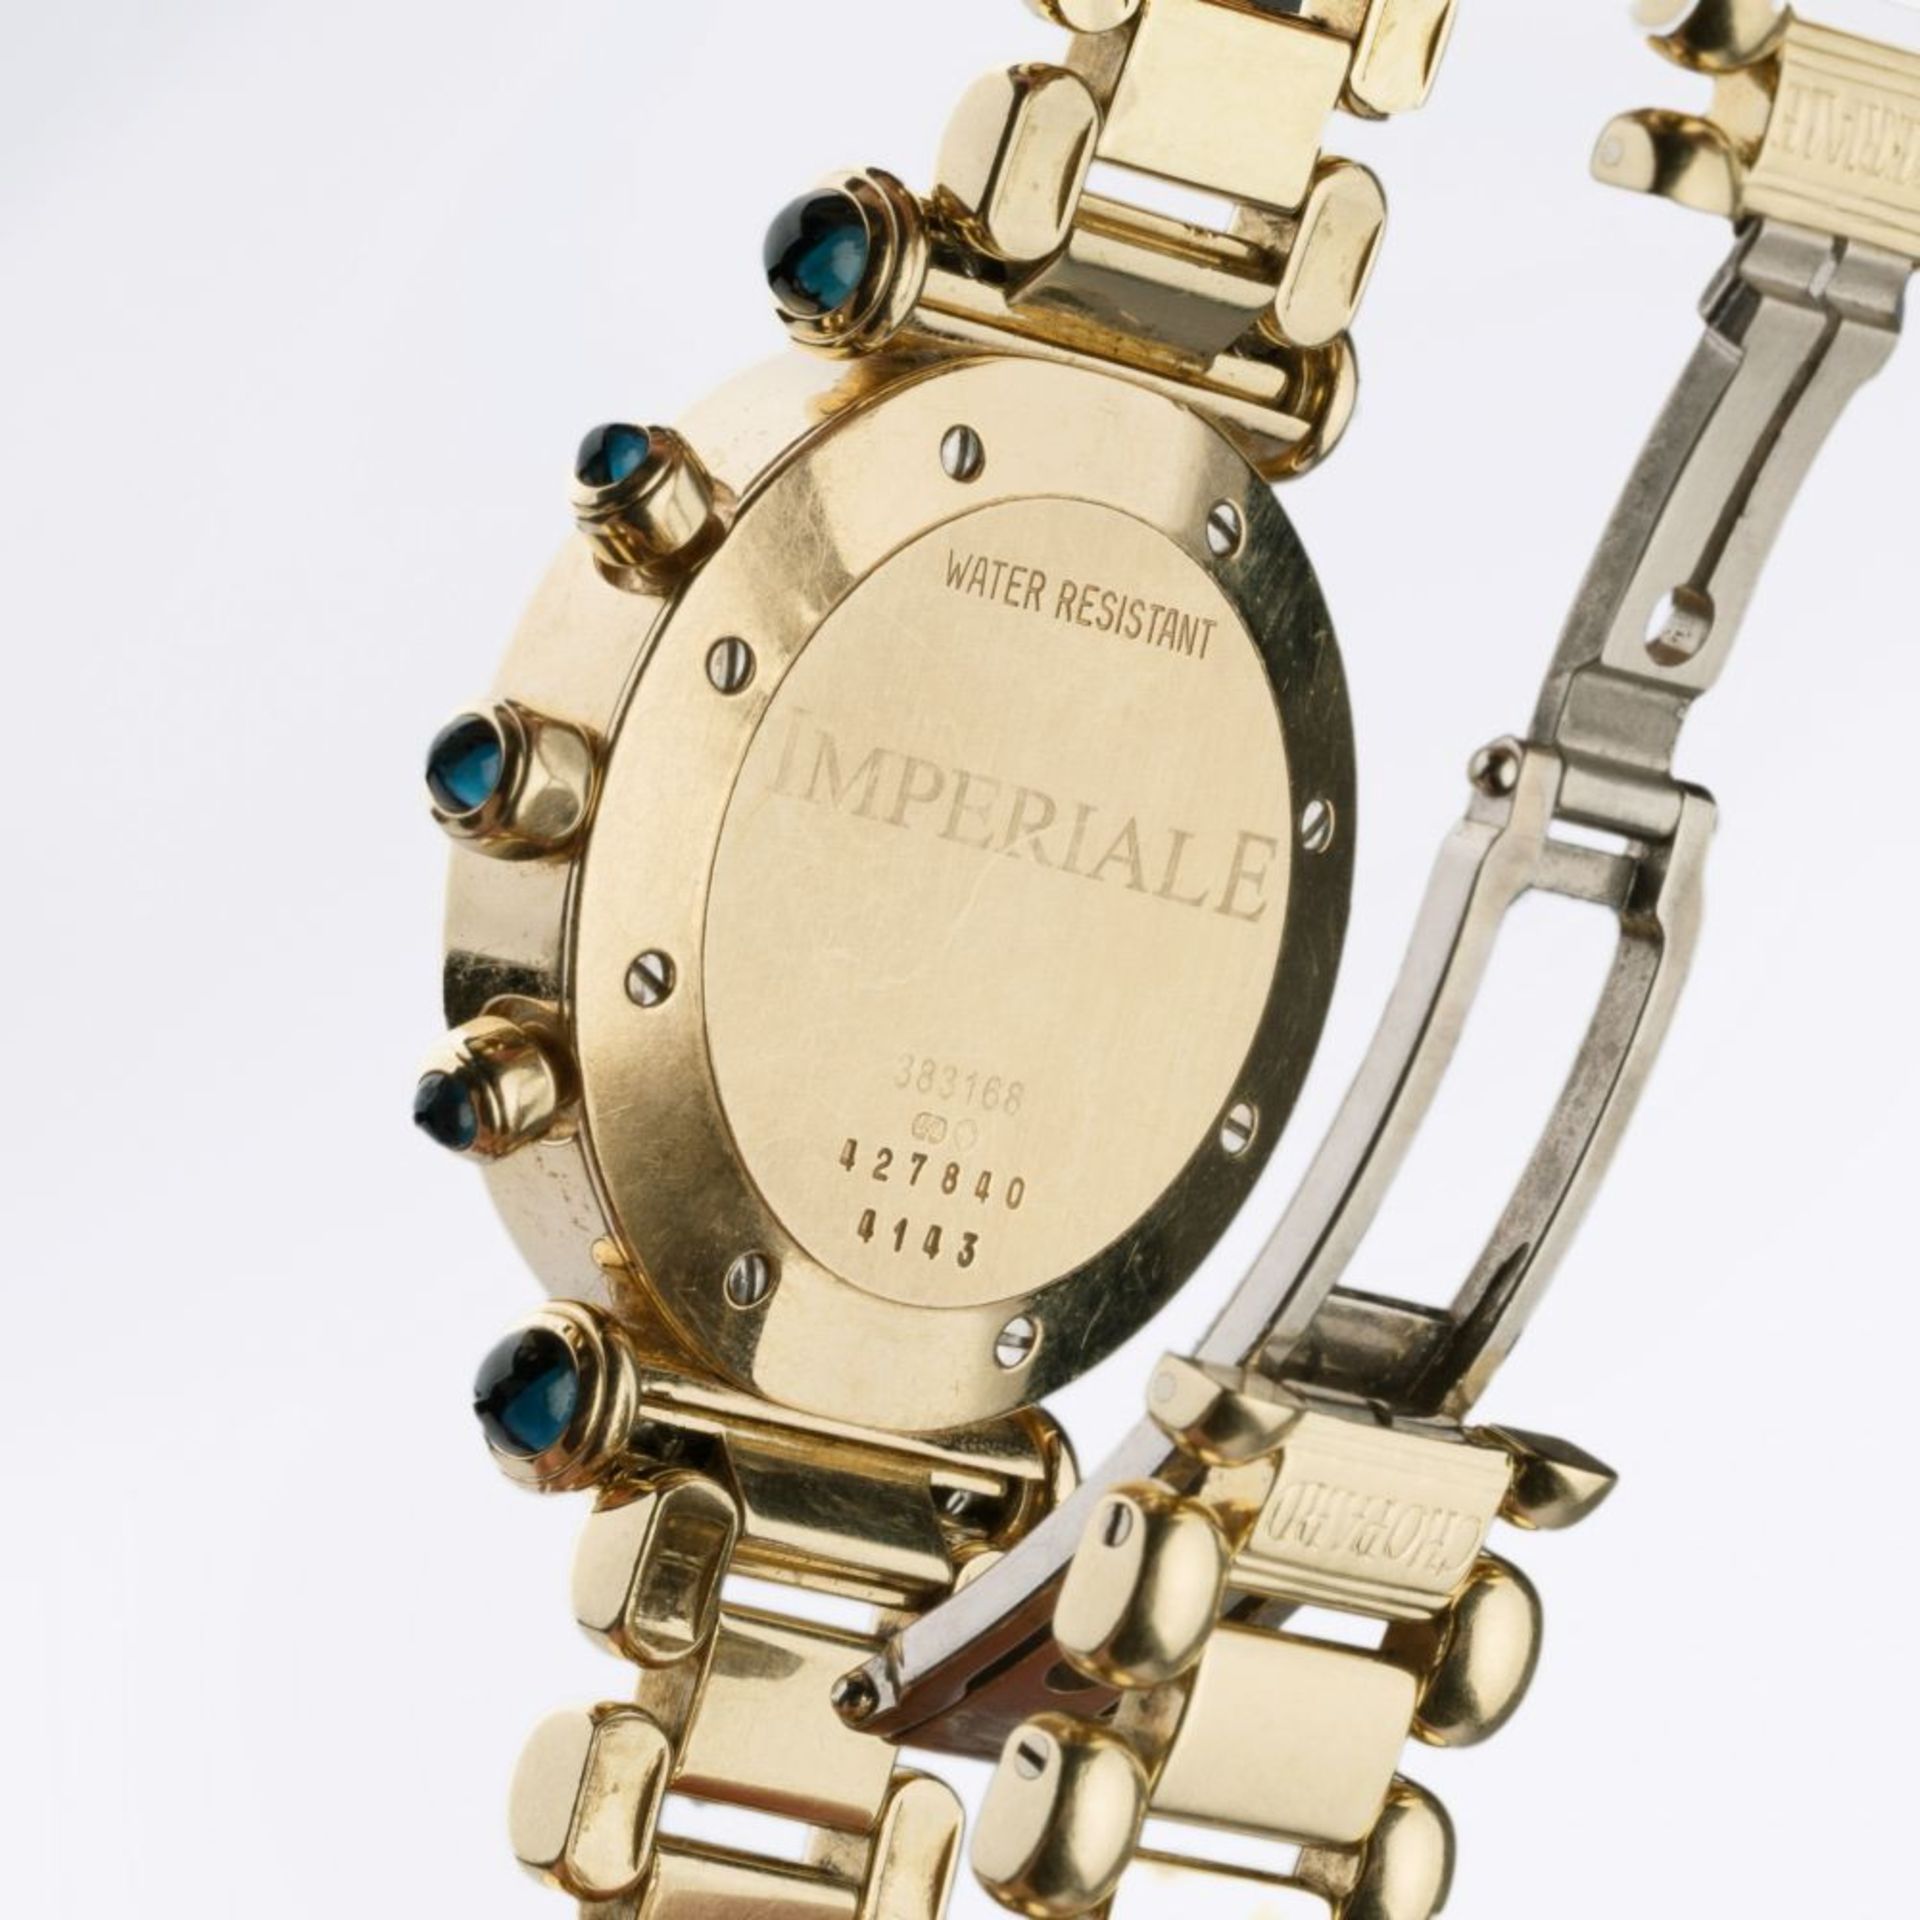 Chopard. A Lady's Wristwatch Imperiale Chronograph with Diamonds. - Image 2 of 2